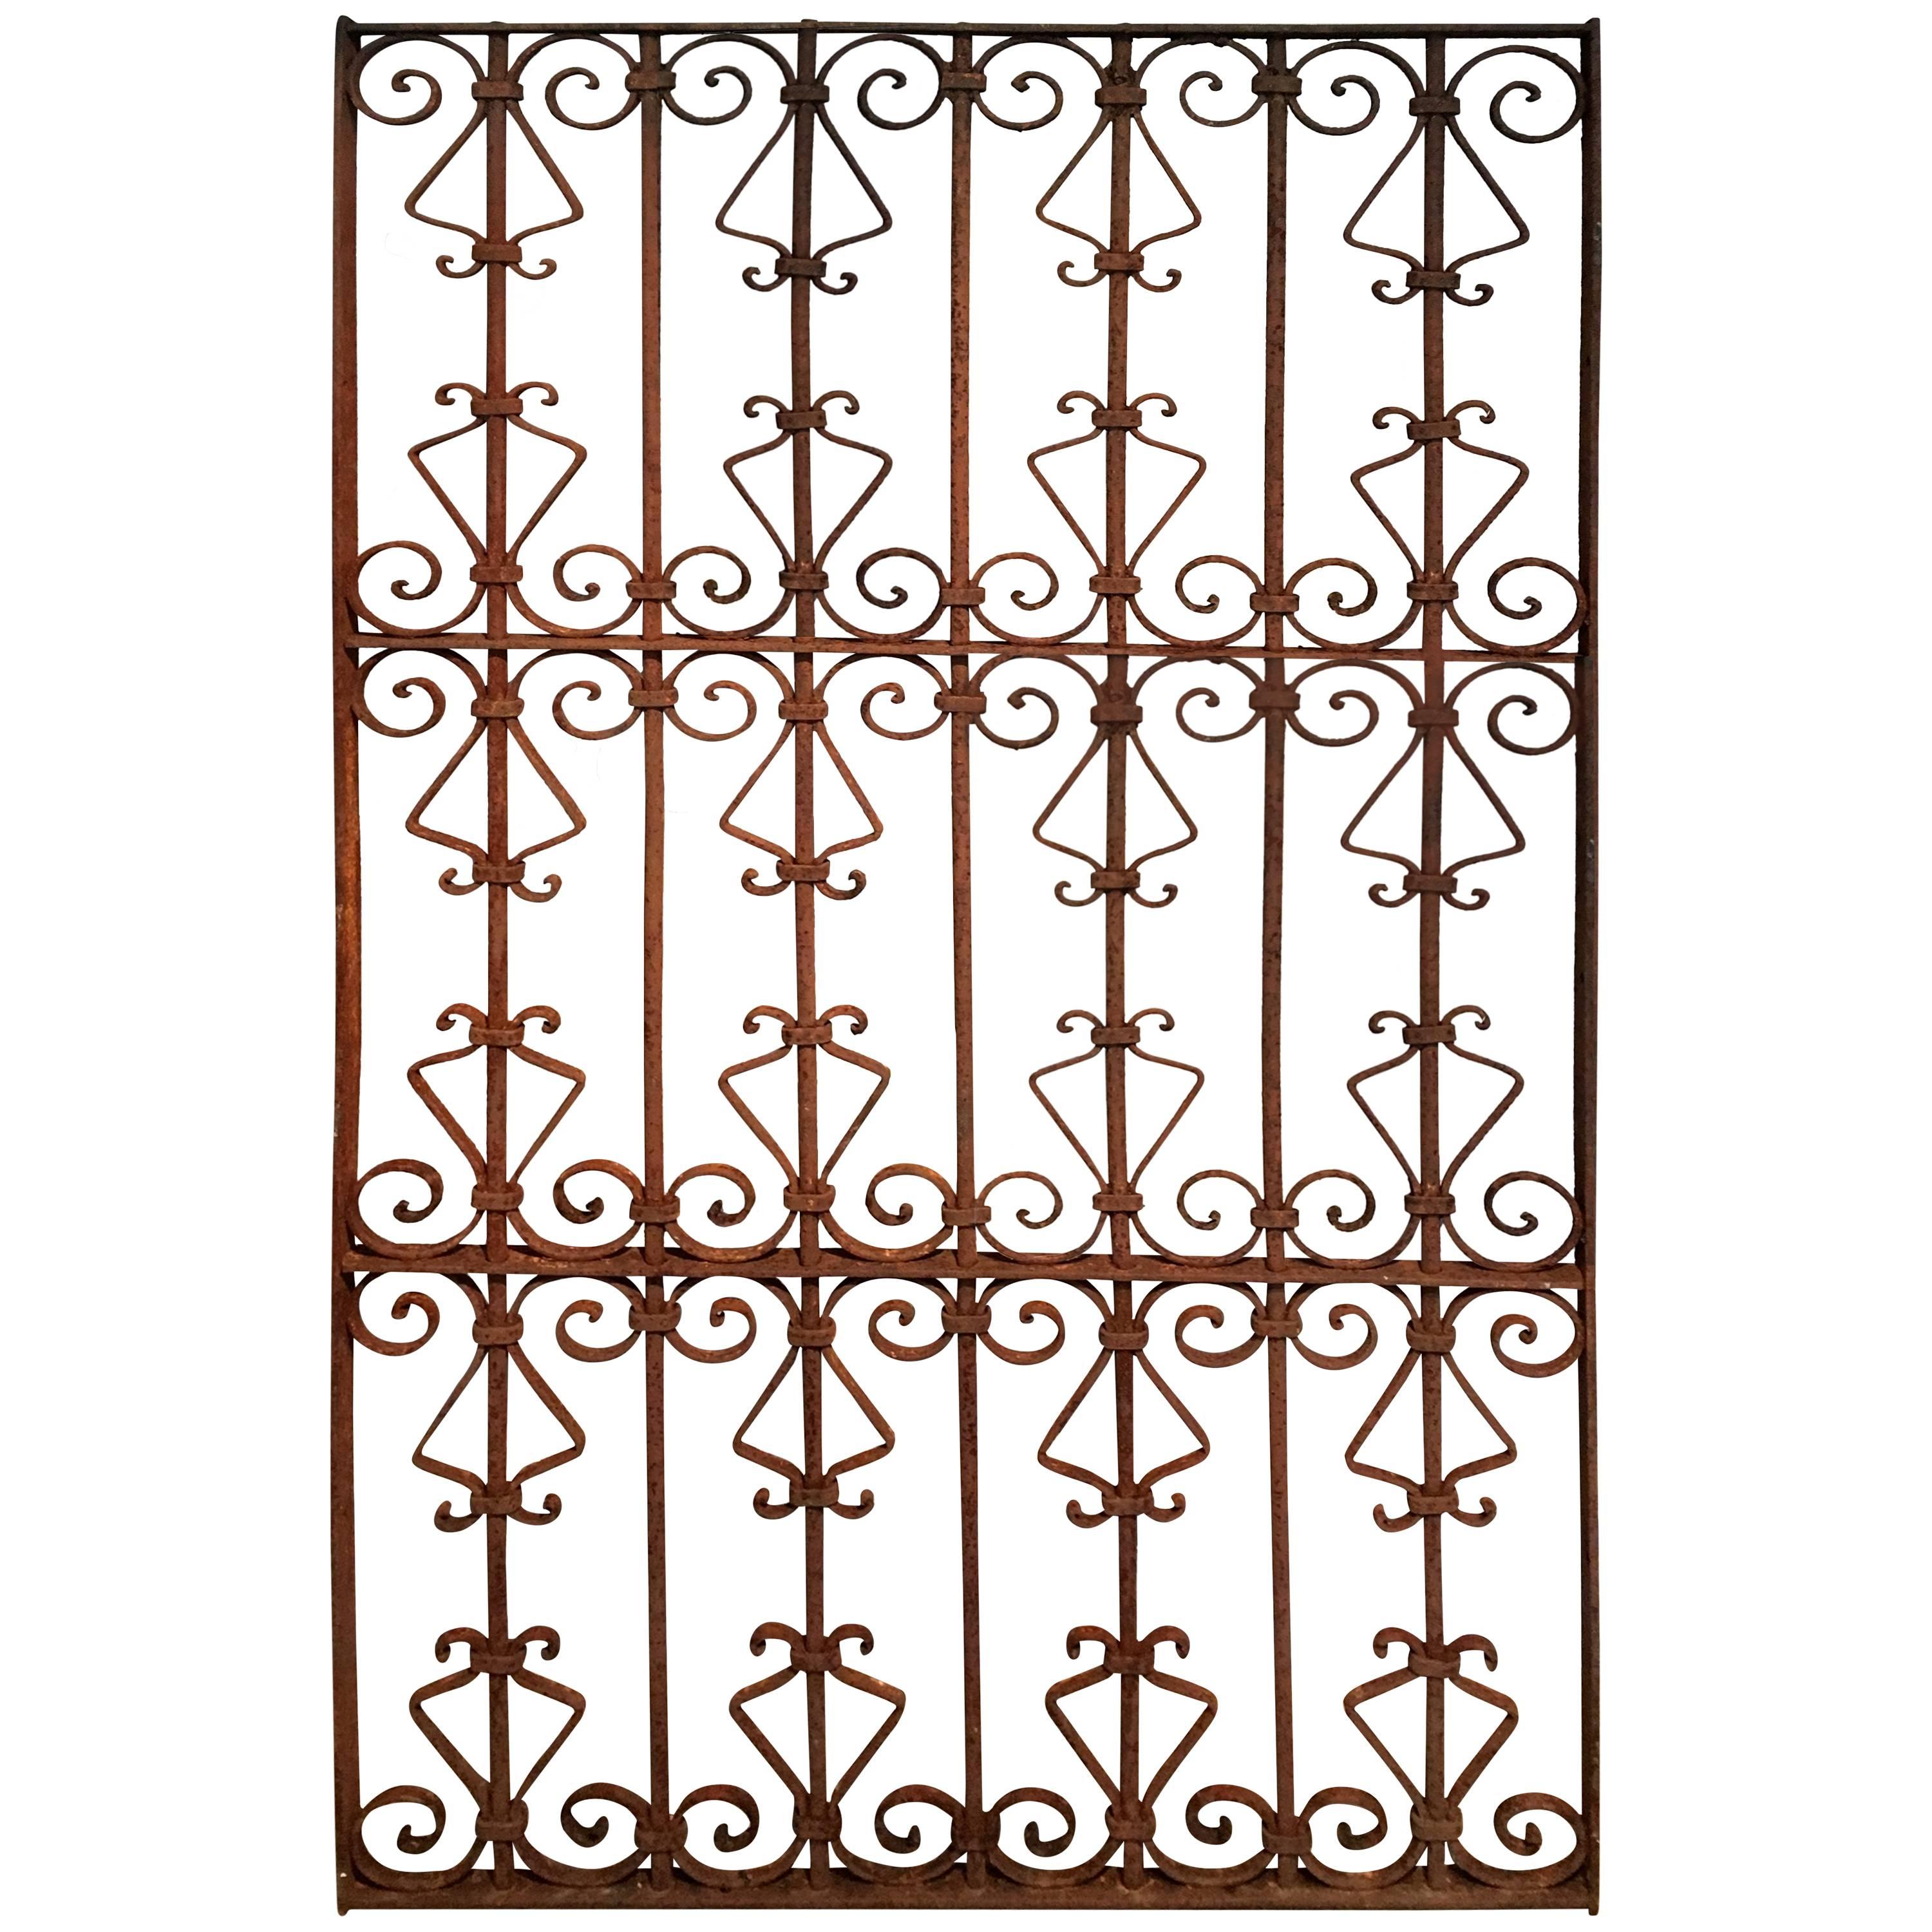 Large Wrought Iron Grille, Gate, or Coffee Table Top